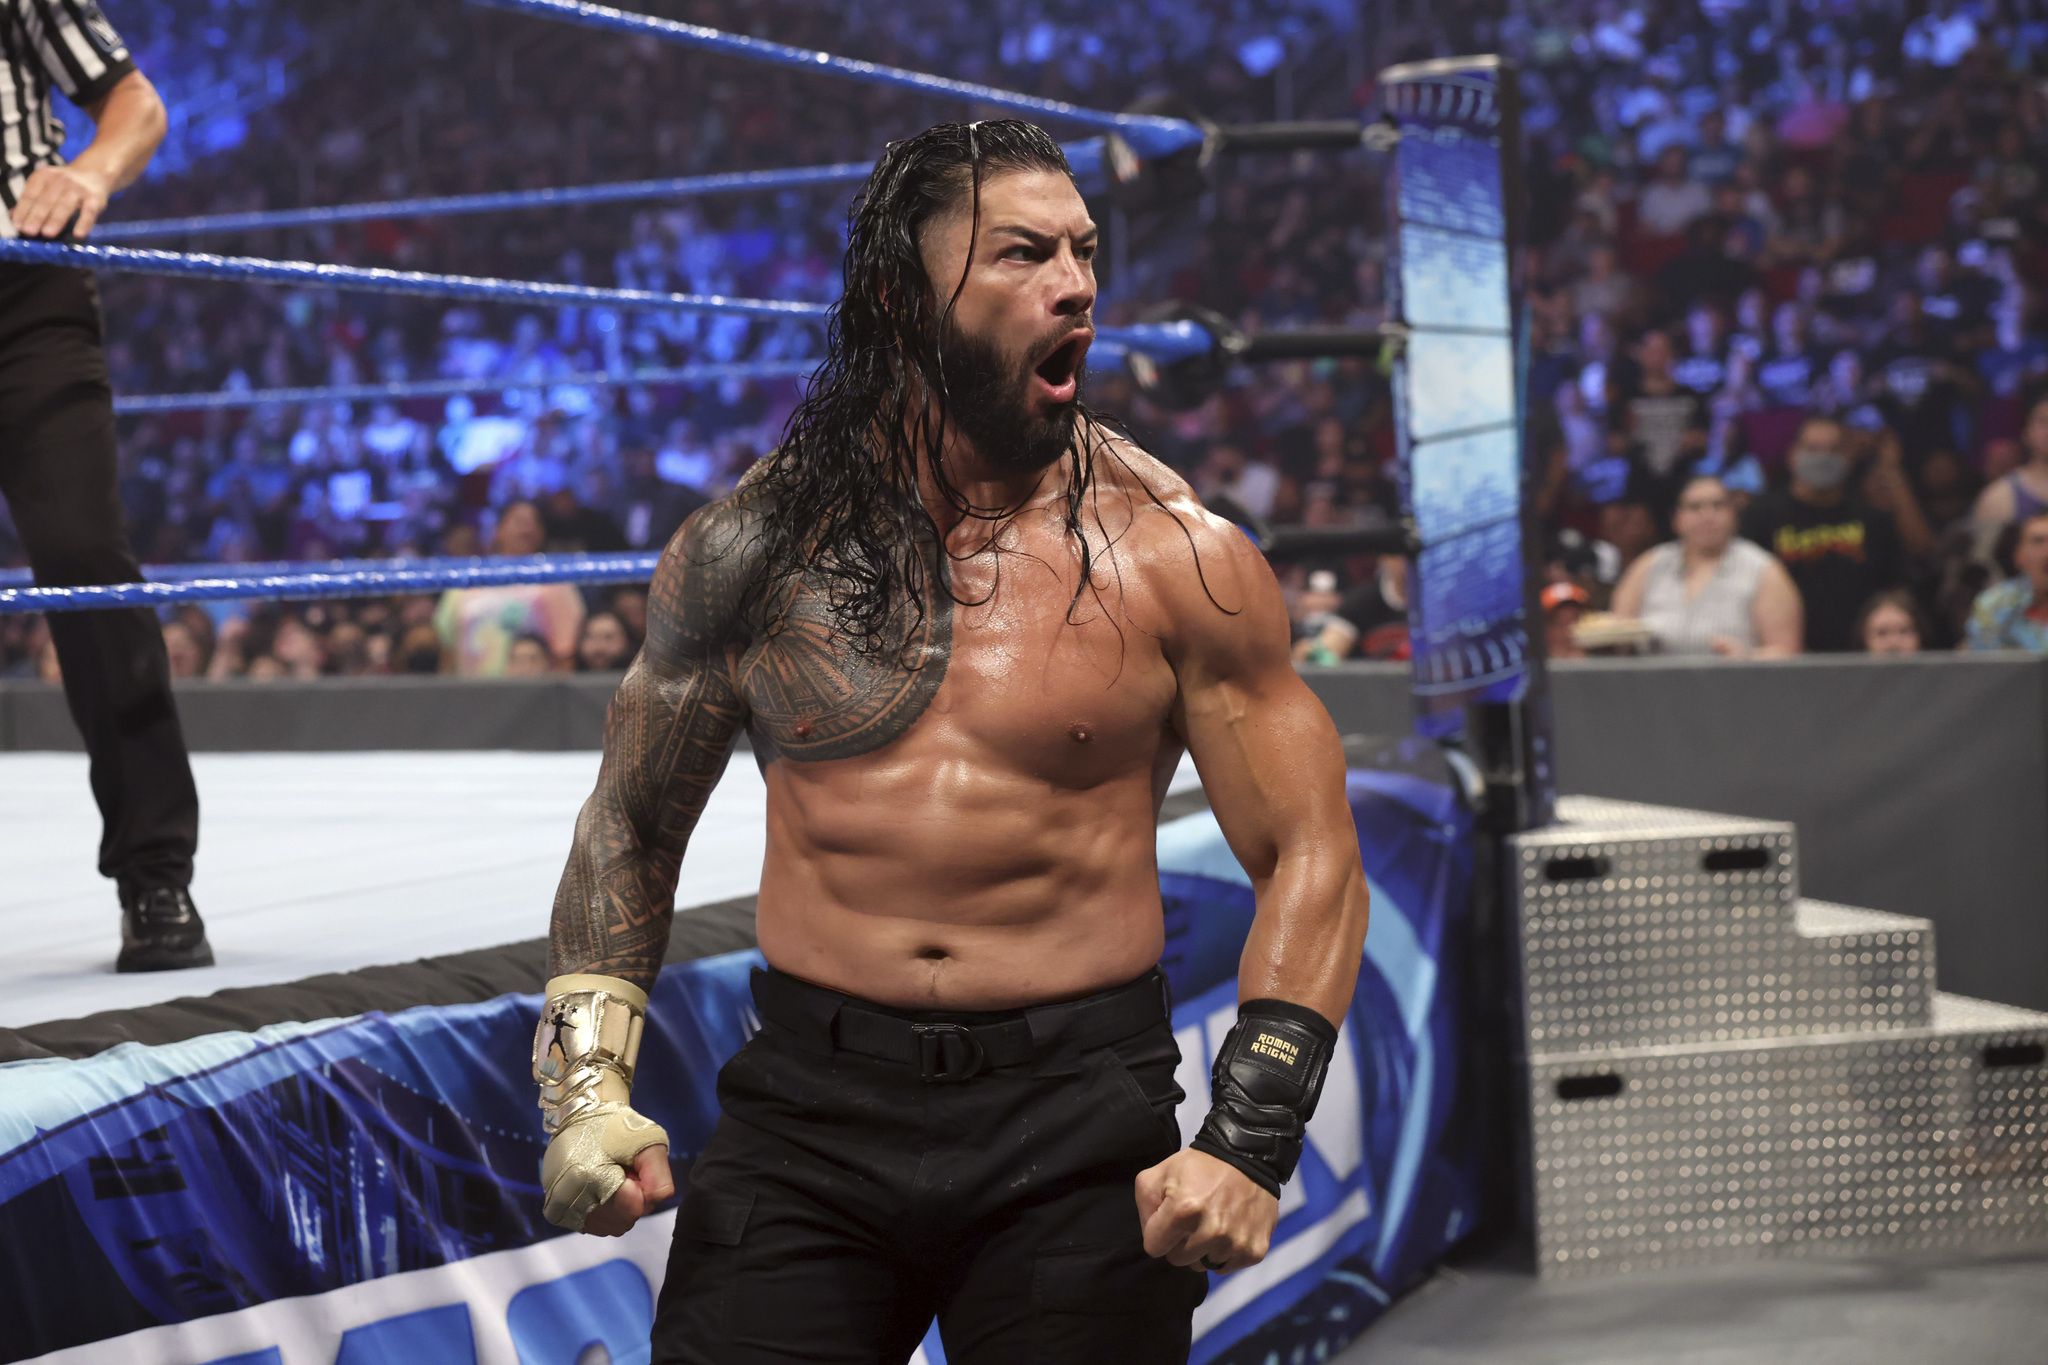 WWEs Roman Reigns Shared His Diet and Workout to Build Muscle